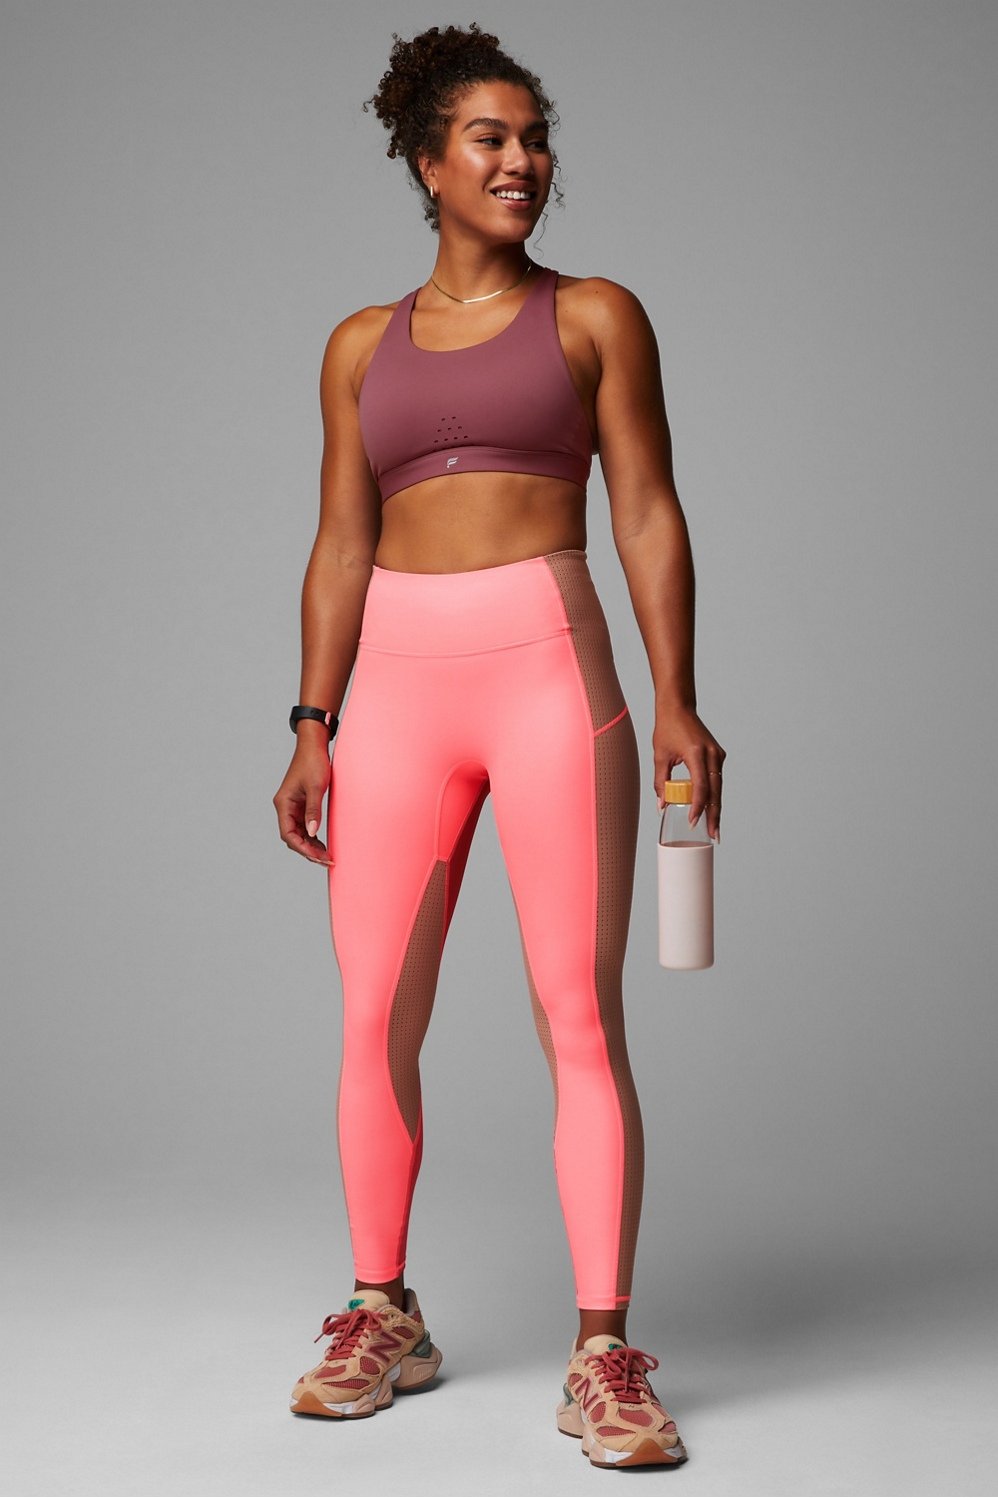 Fabletics large sports bra - $25 - From Brittany